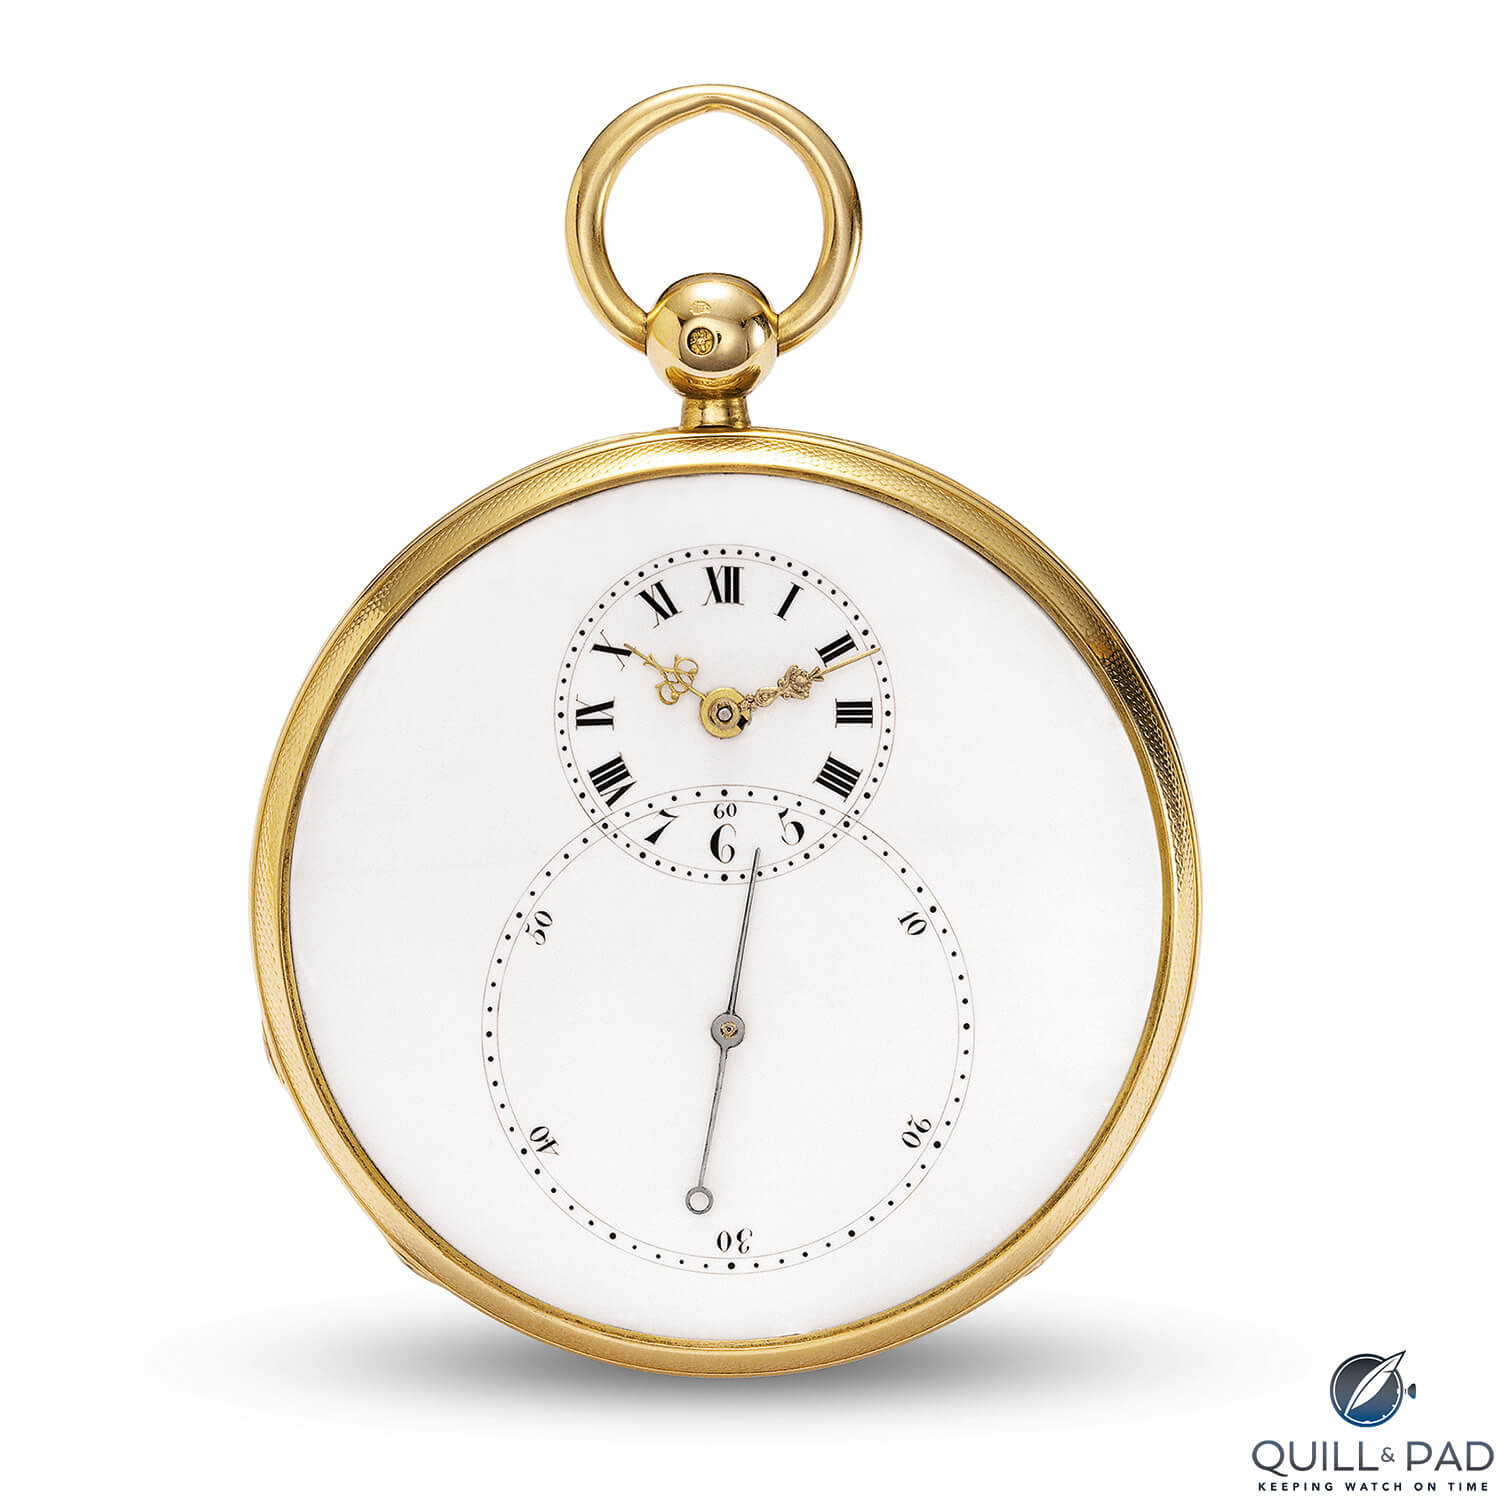 The design of this historic Jaquet Droz pocket watch from 1784 spawned the Grande Seconde line